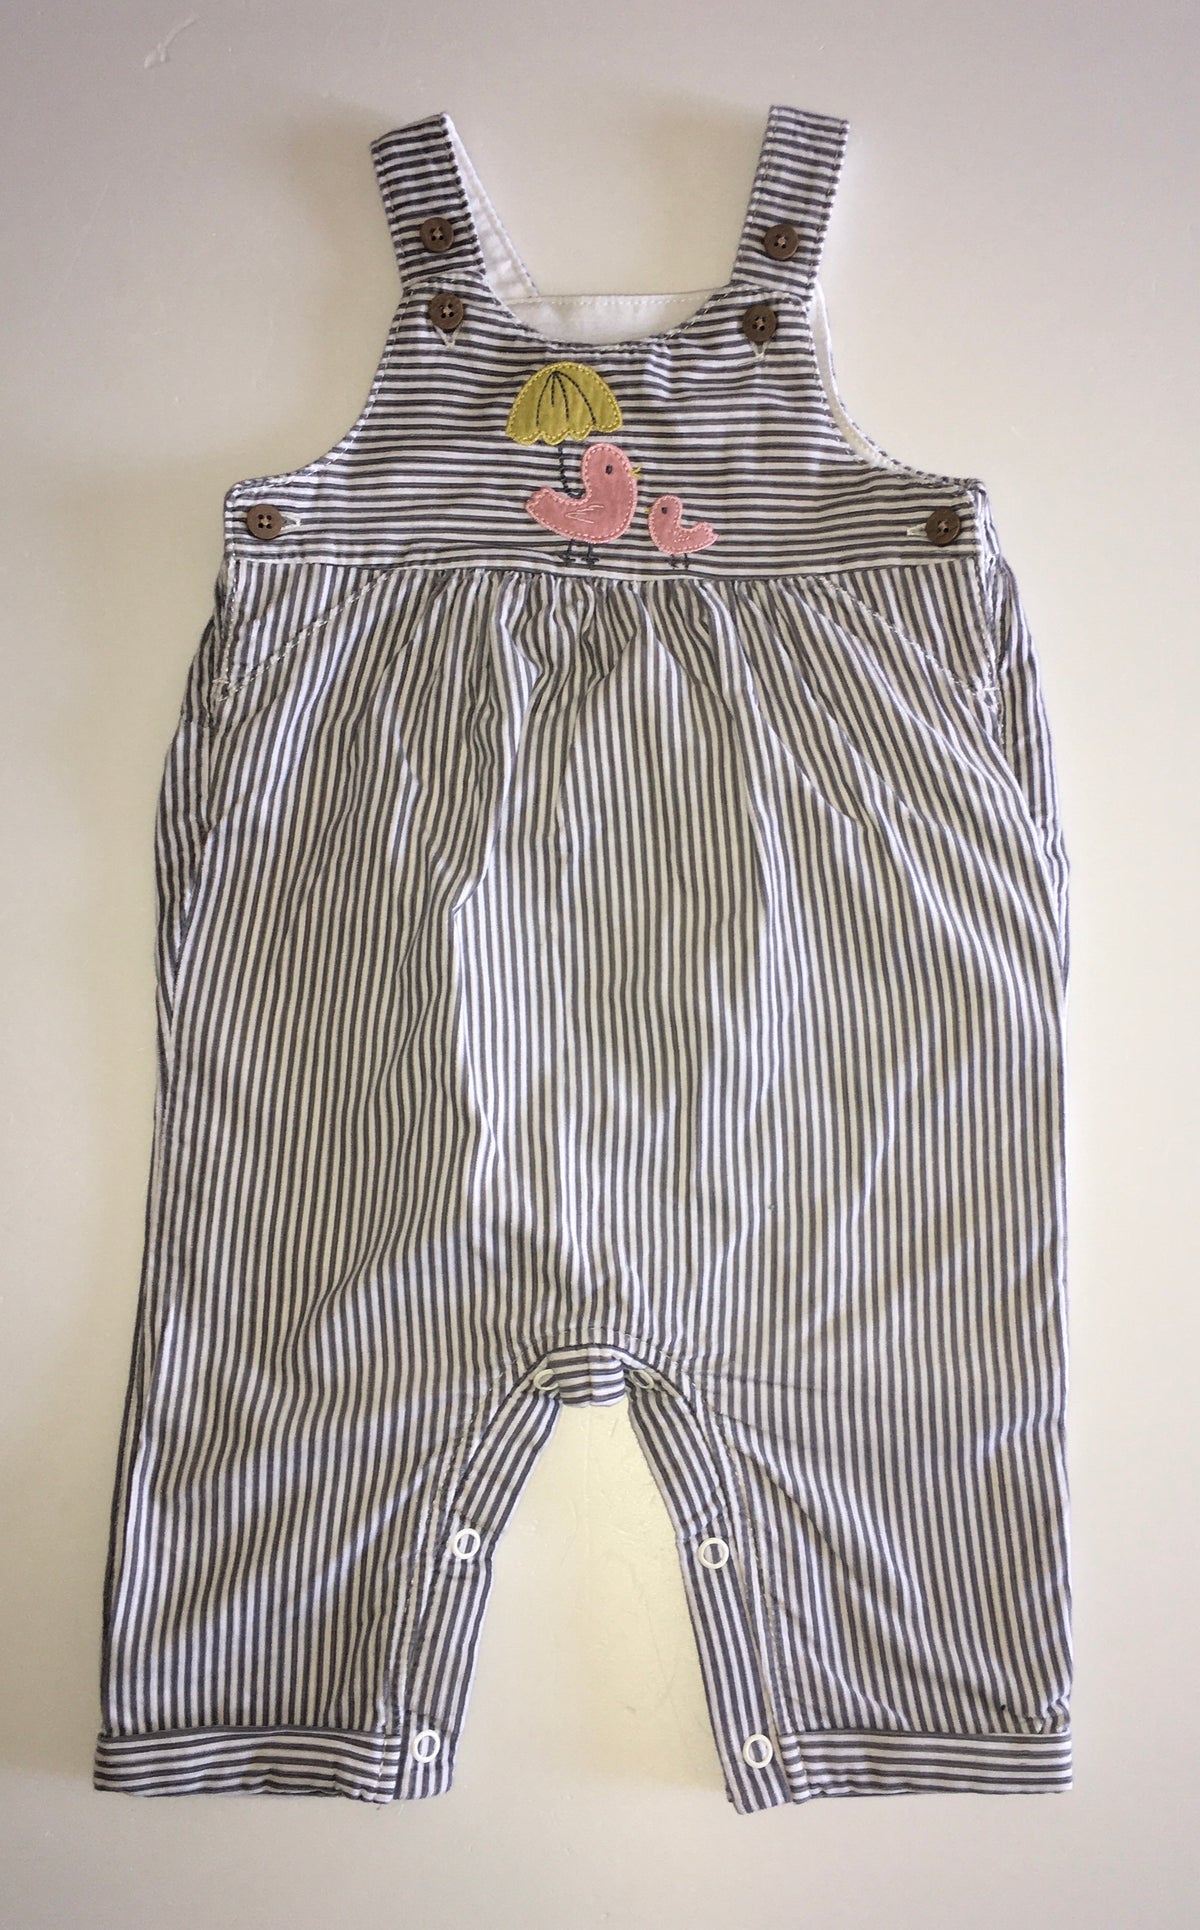 M&S Dungarees, Girls 3-6 Months